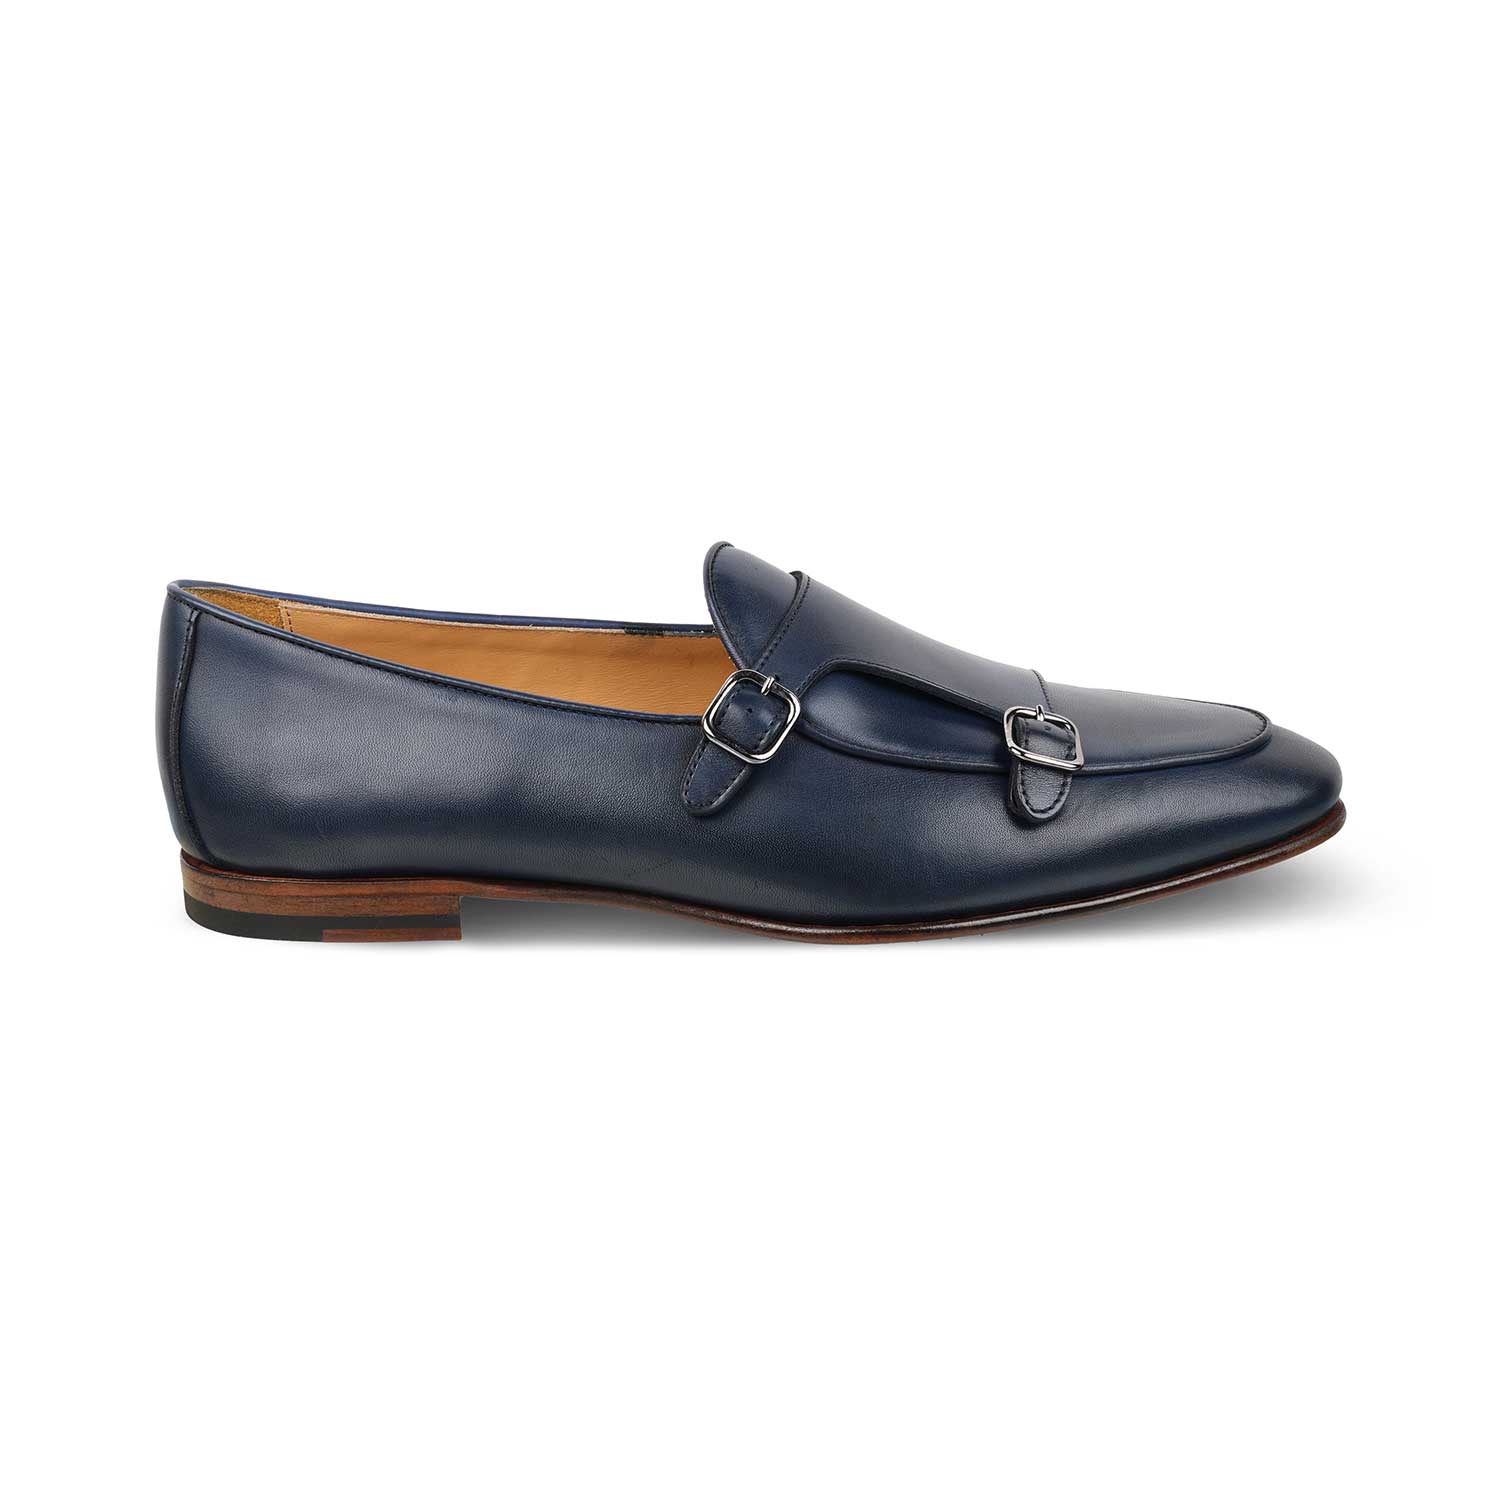 The Maccabeo Blue Men's Handcrafted Double Monk Shoes Tresmode